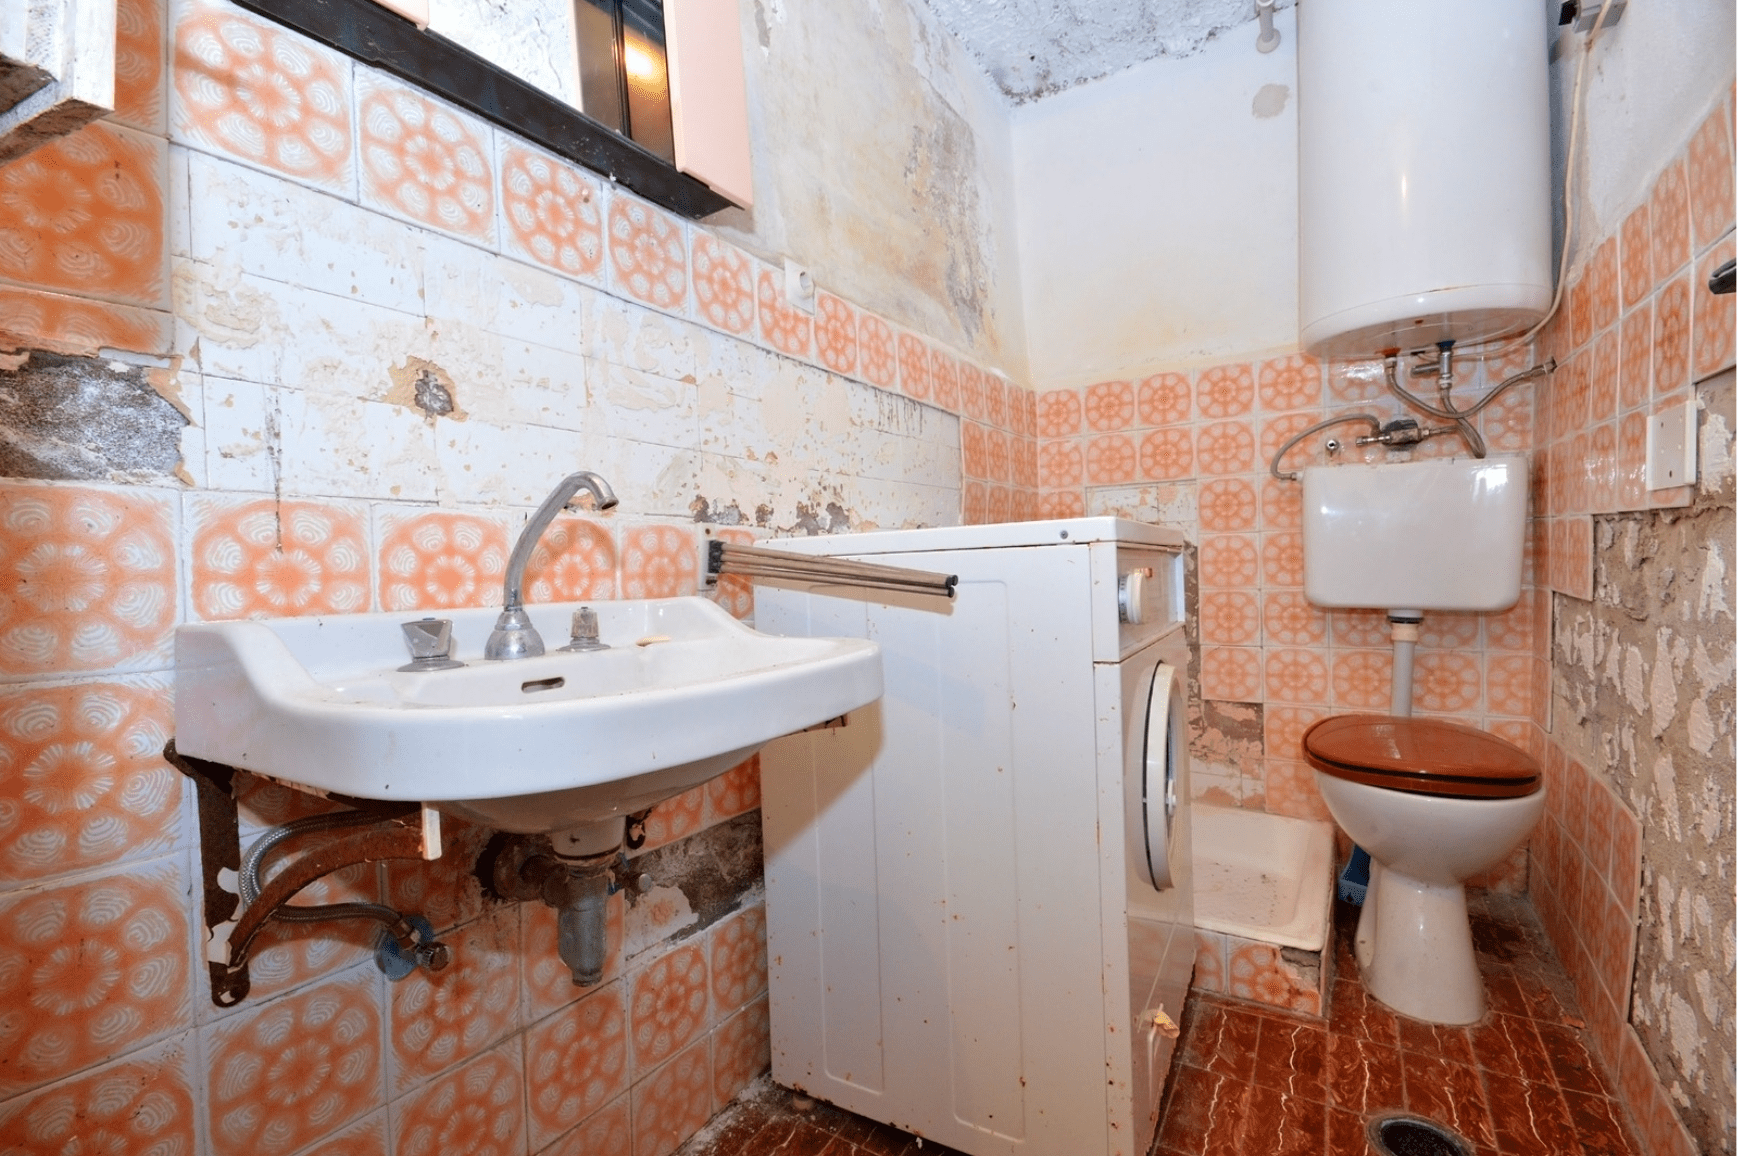 Why Do Old Houses Have Only One Bathroom?